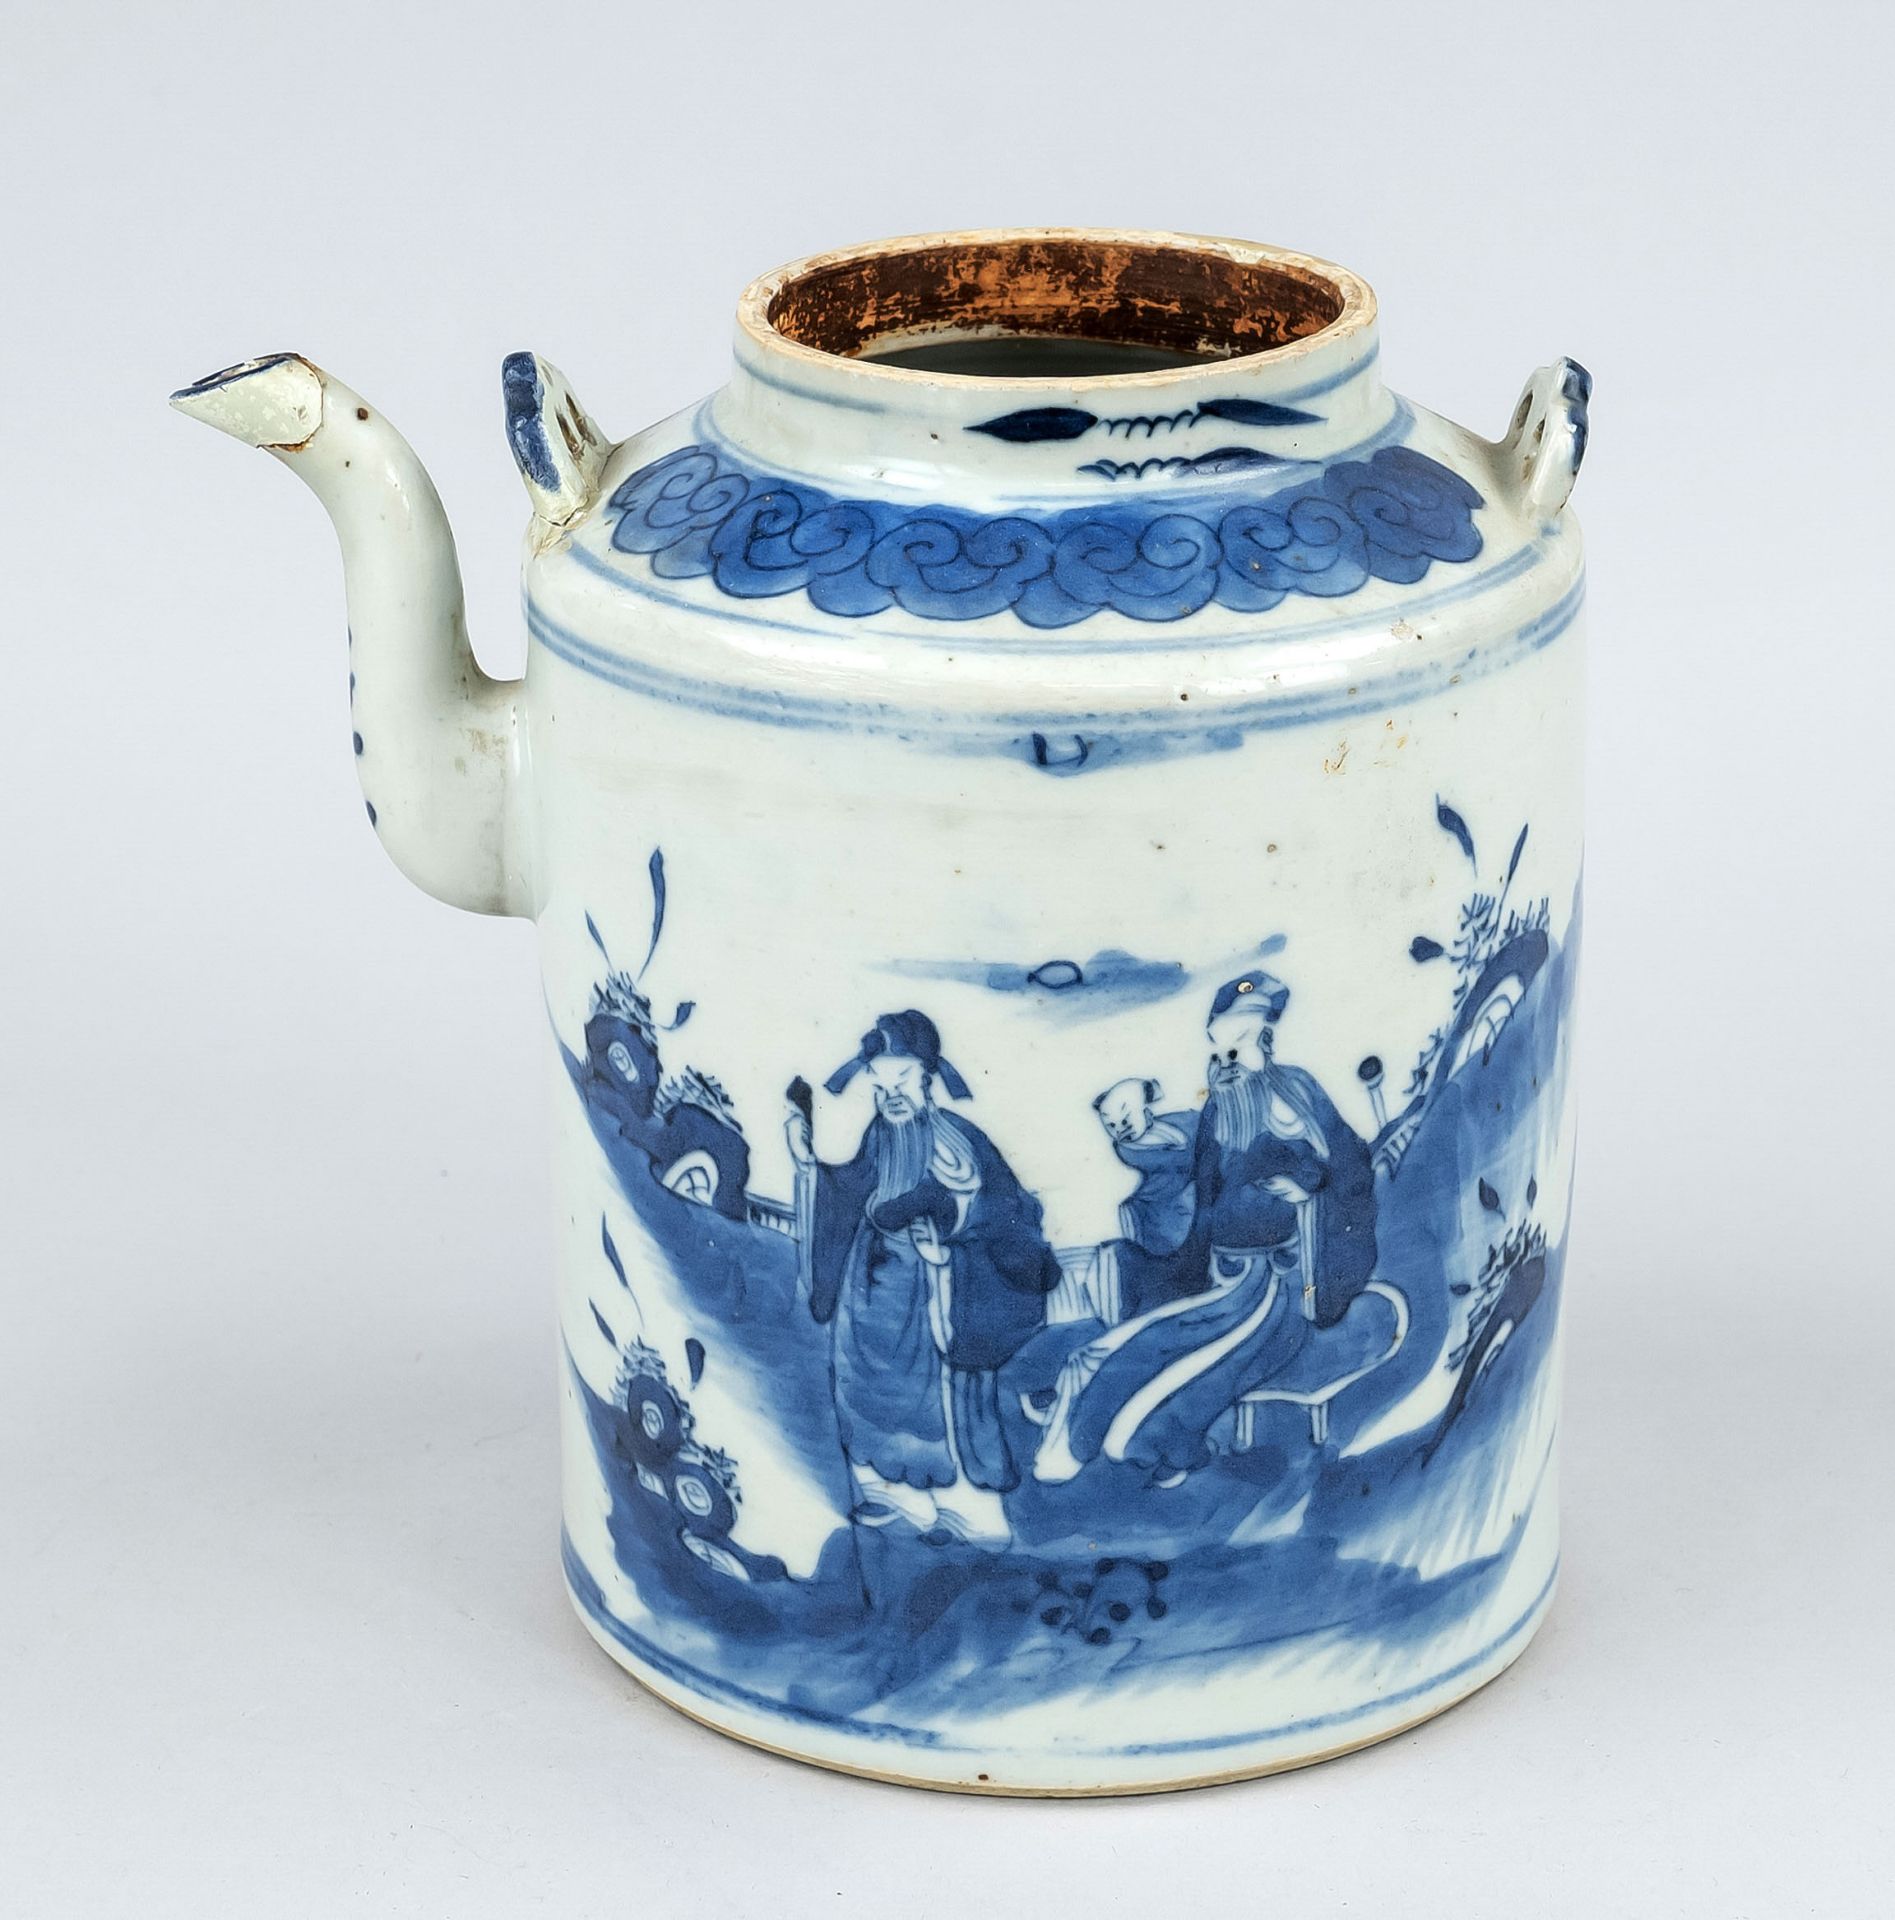 Rare large teapot, China, Qing dynasty(1644-1911), 18th century, porcelain with cobalt blue